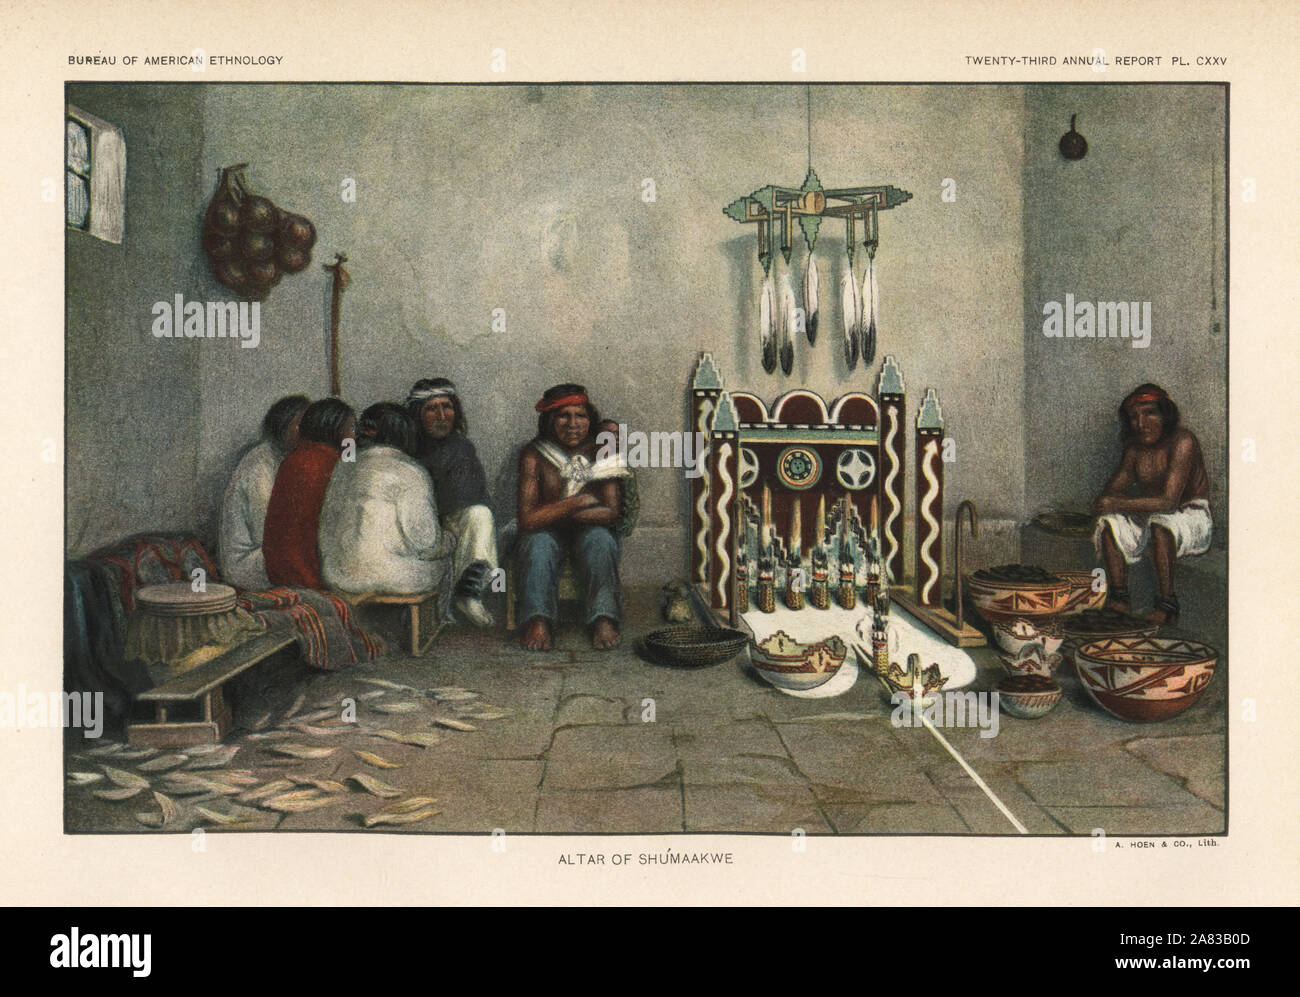 Altar of Shu'maakwe, Zuni nation. Chromolithograph by August Hoen from John Wesley Powell's 23rd Annual Report of the Bureau of American Ethnology, Washington, 1904. Stock Photo